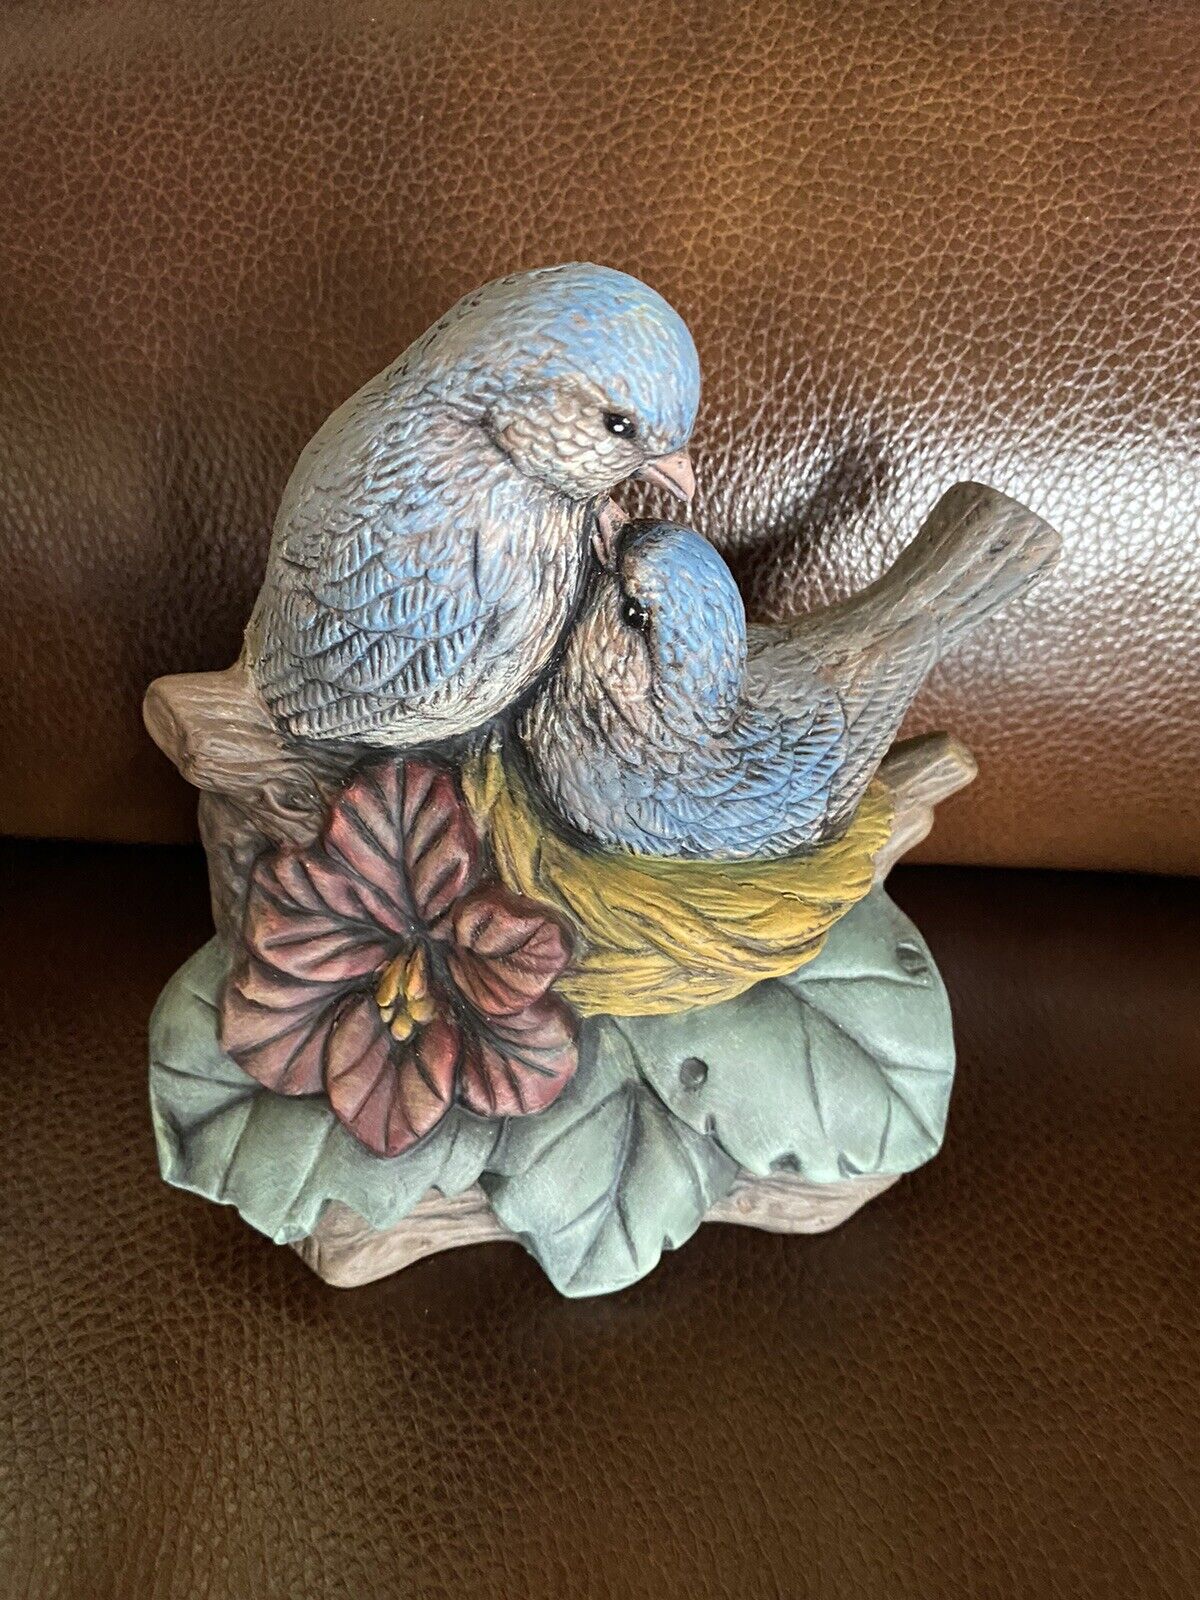 Small Hand Painted Ceramic Bird Figurine. 5.5 in. tall Blue & Green - Multicolor